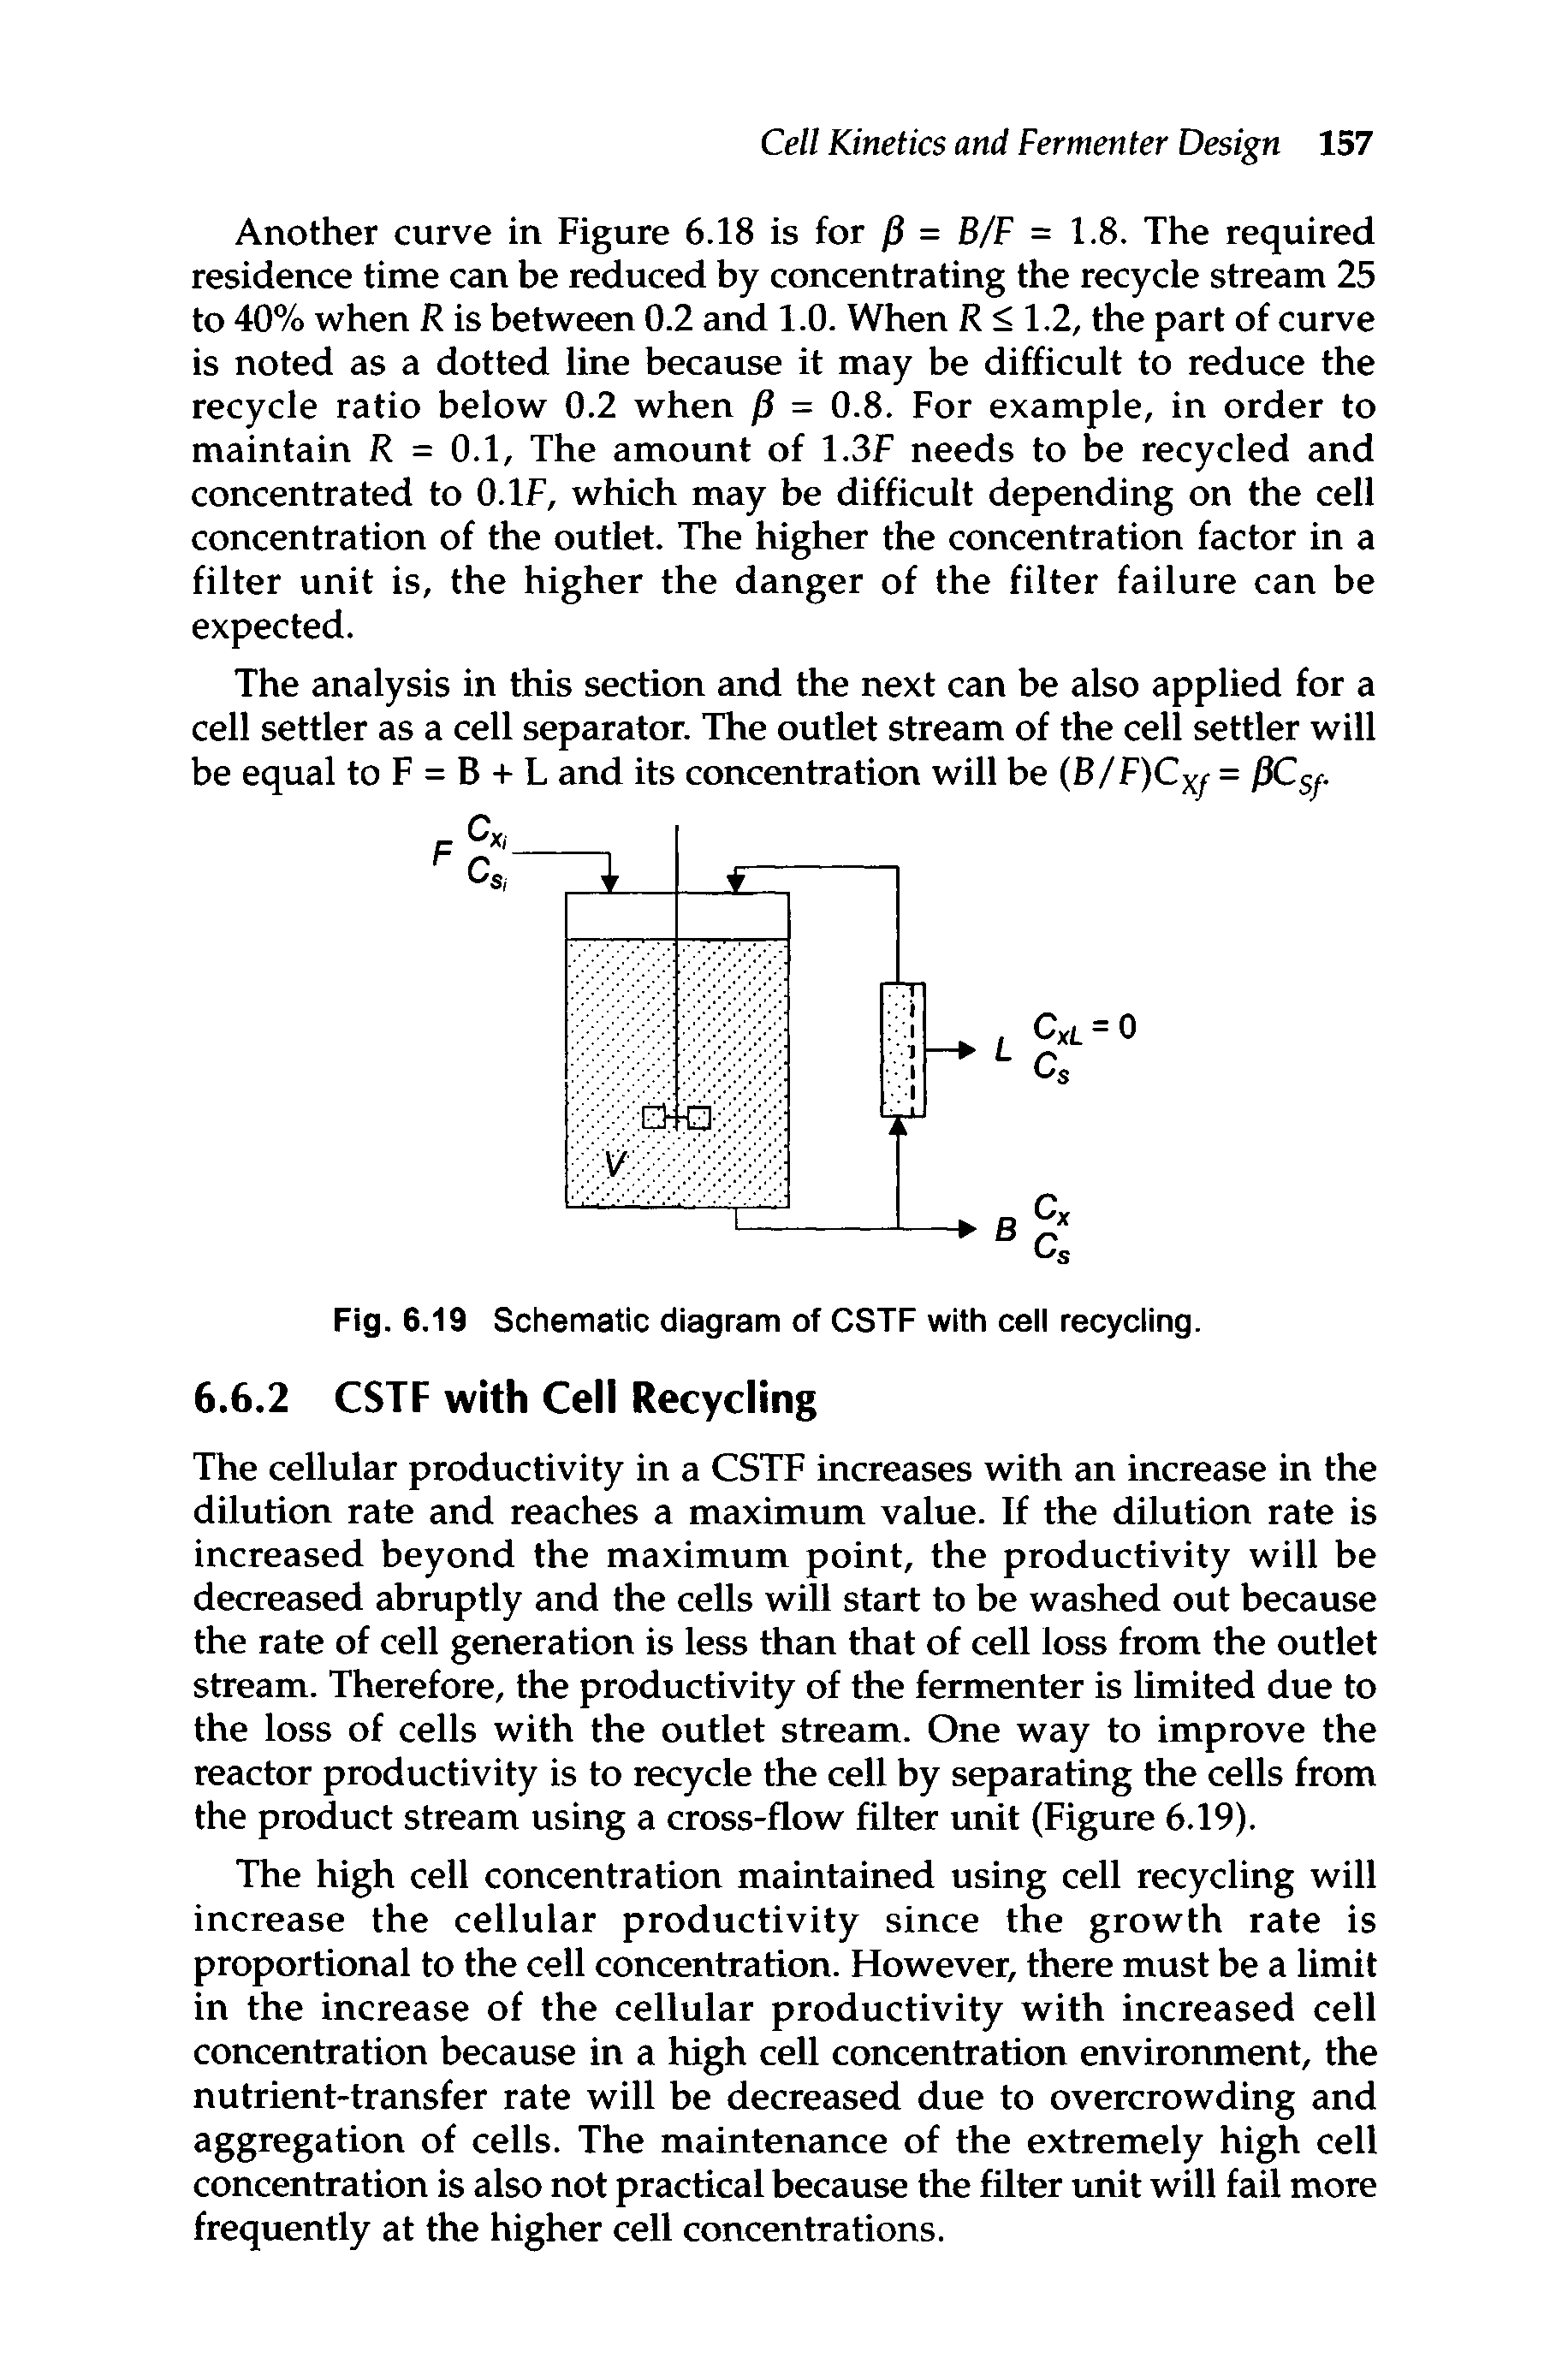 Fig. 6.19 Schematic diagram of CSTF with cell recycling.